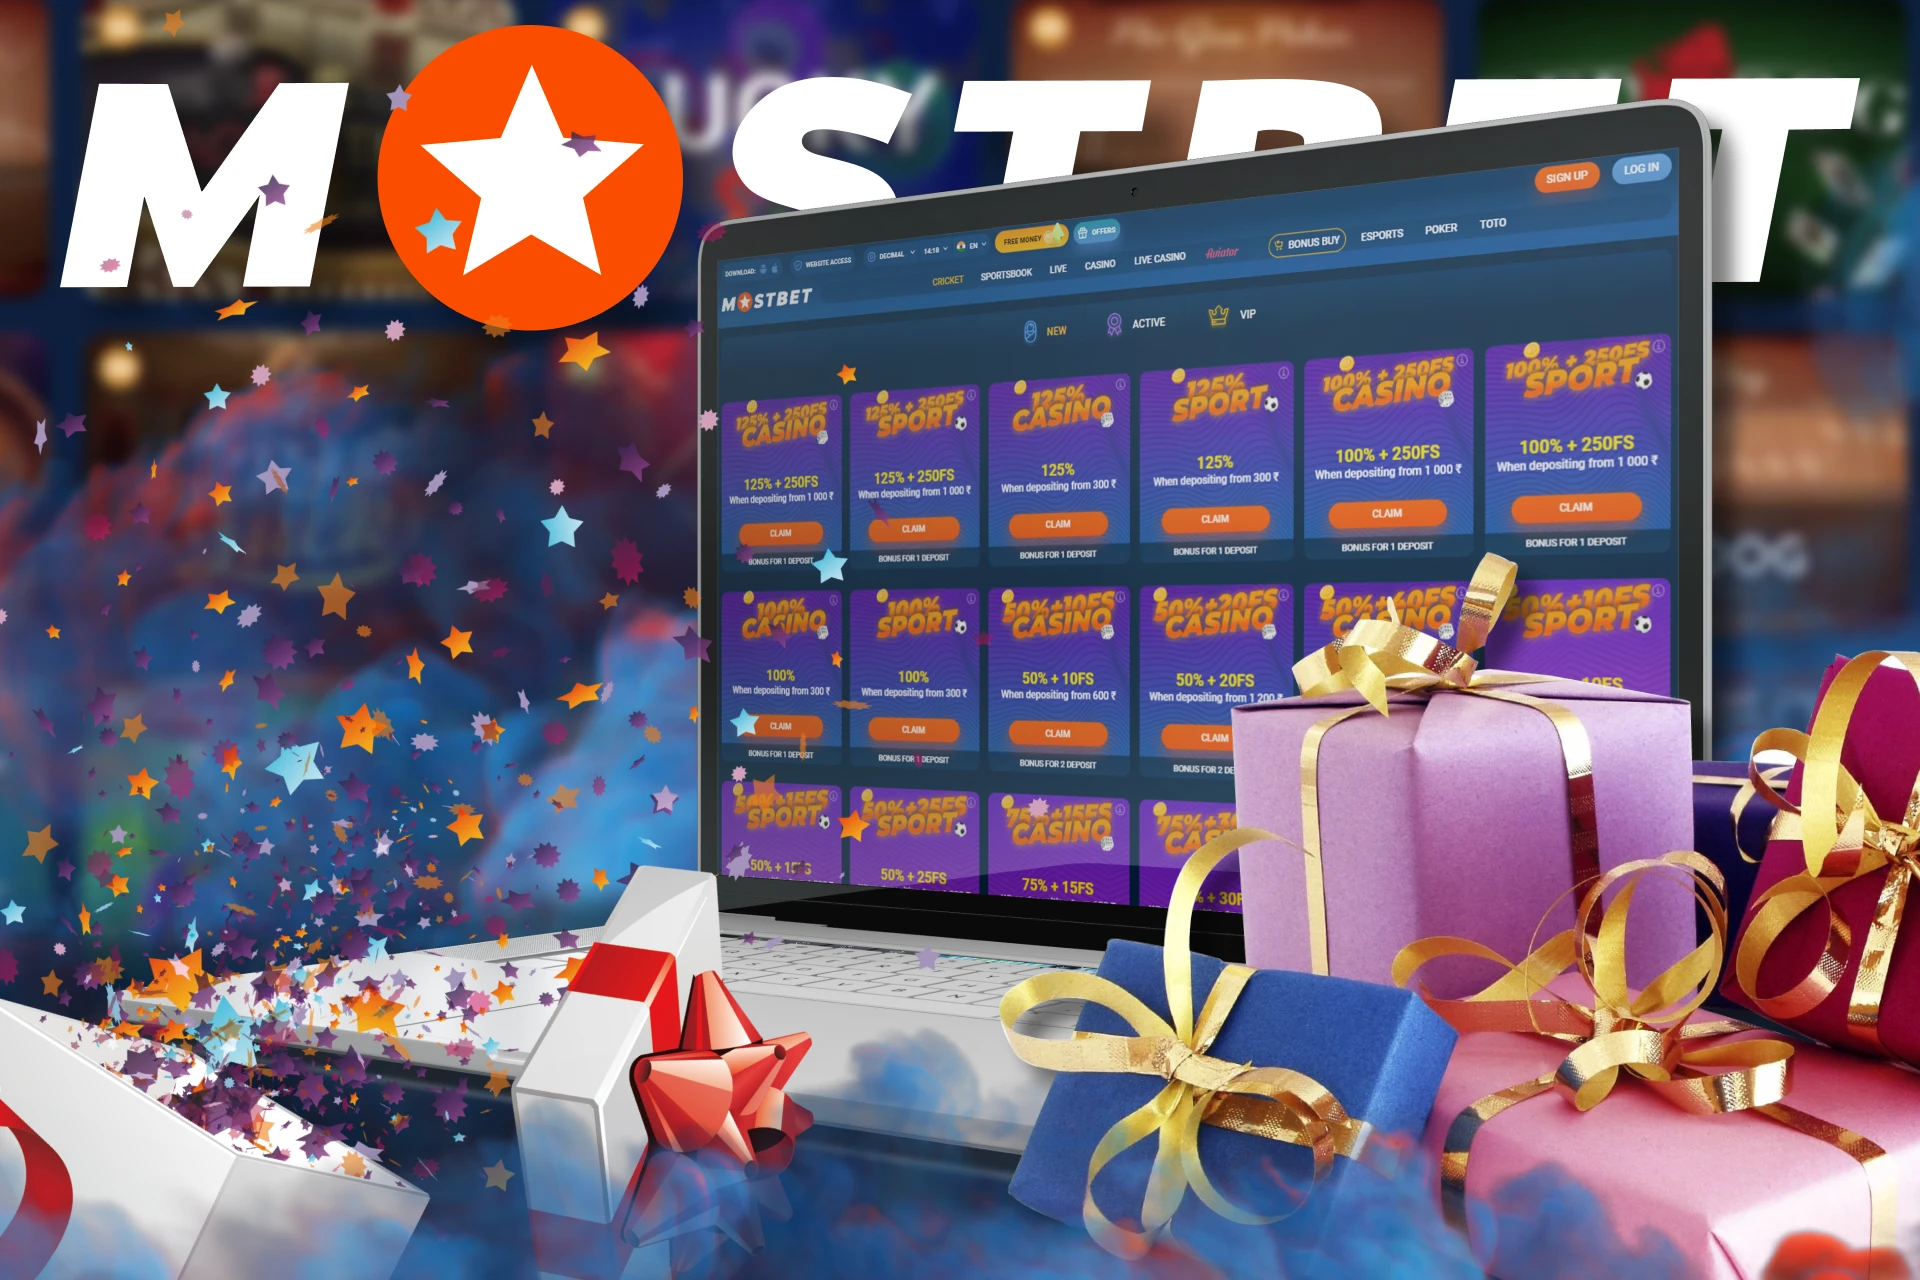 Many profitable bonuses for card players at Mostbet.